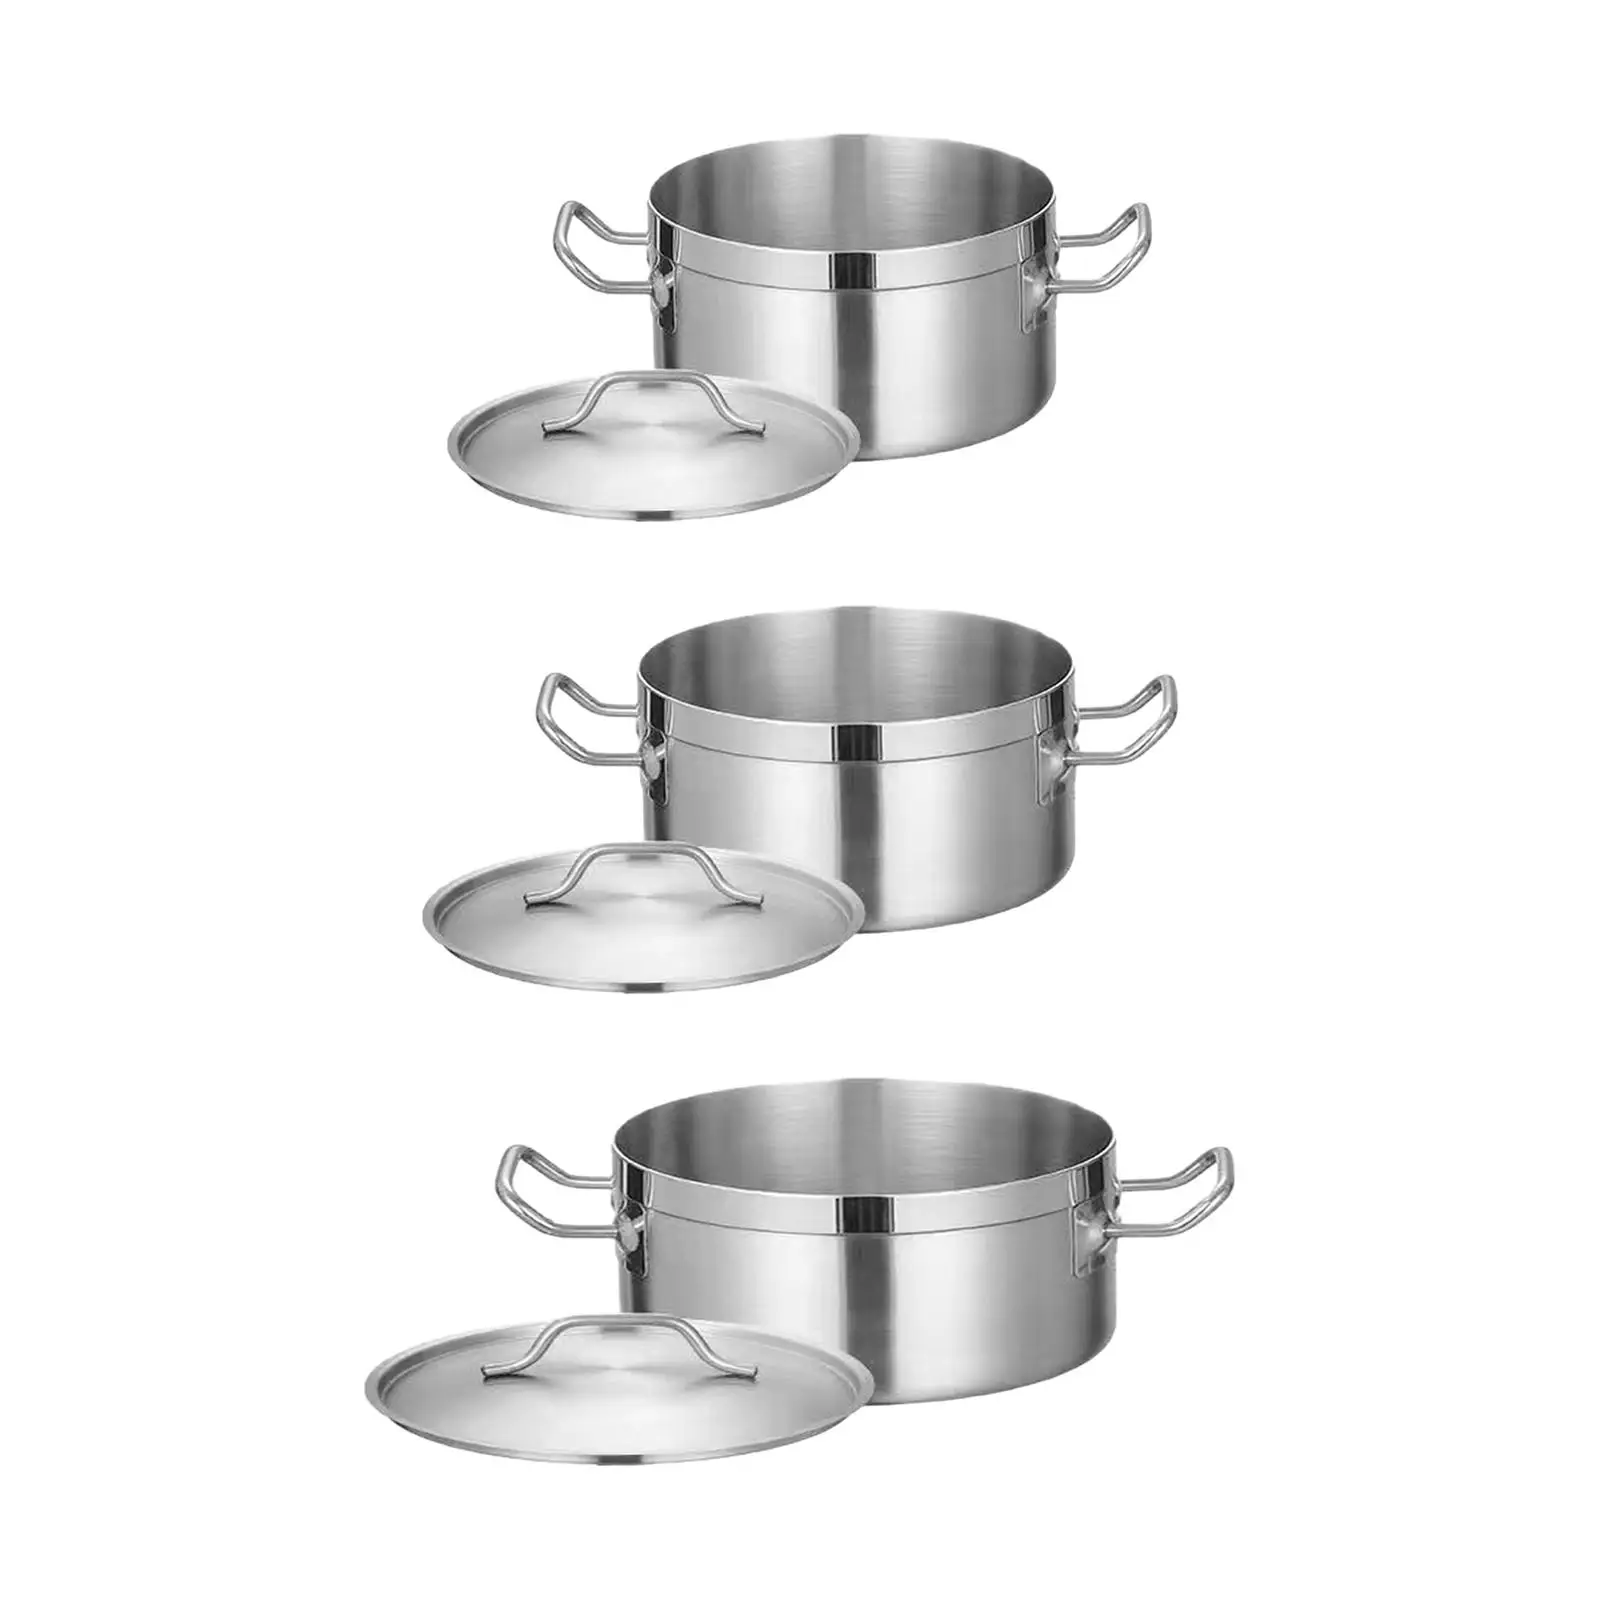 Stainless Steel Stockpot Cooking Pot with Lid Saucepan Small Cookware Induction Stockpot Soup Pot for Commercial Kitchen